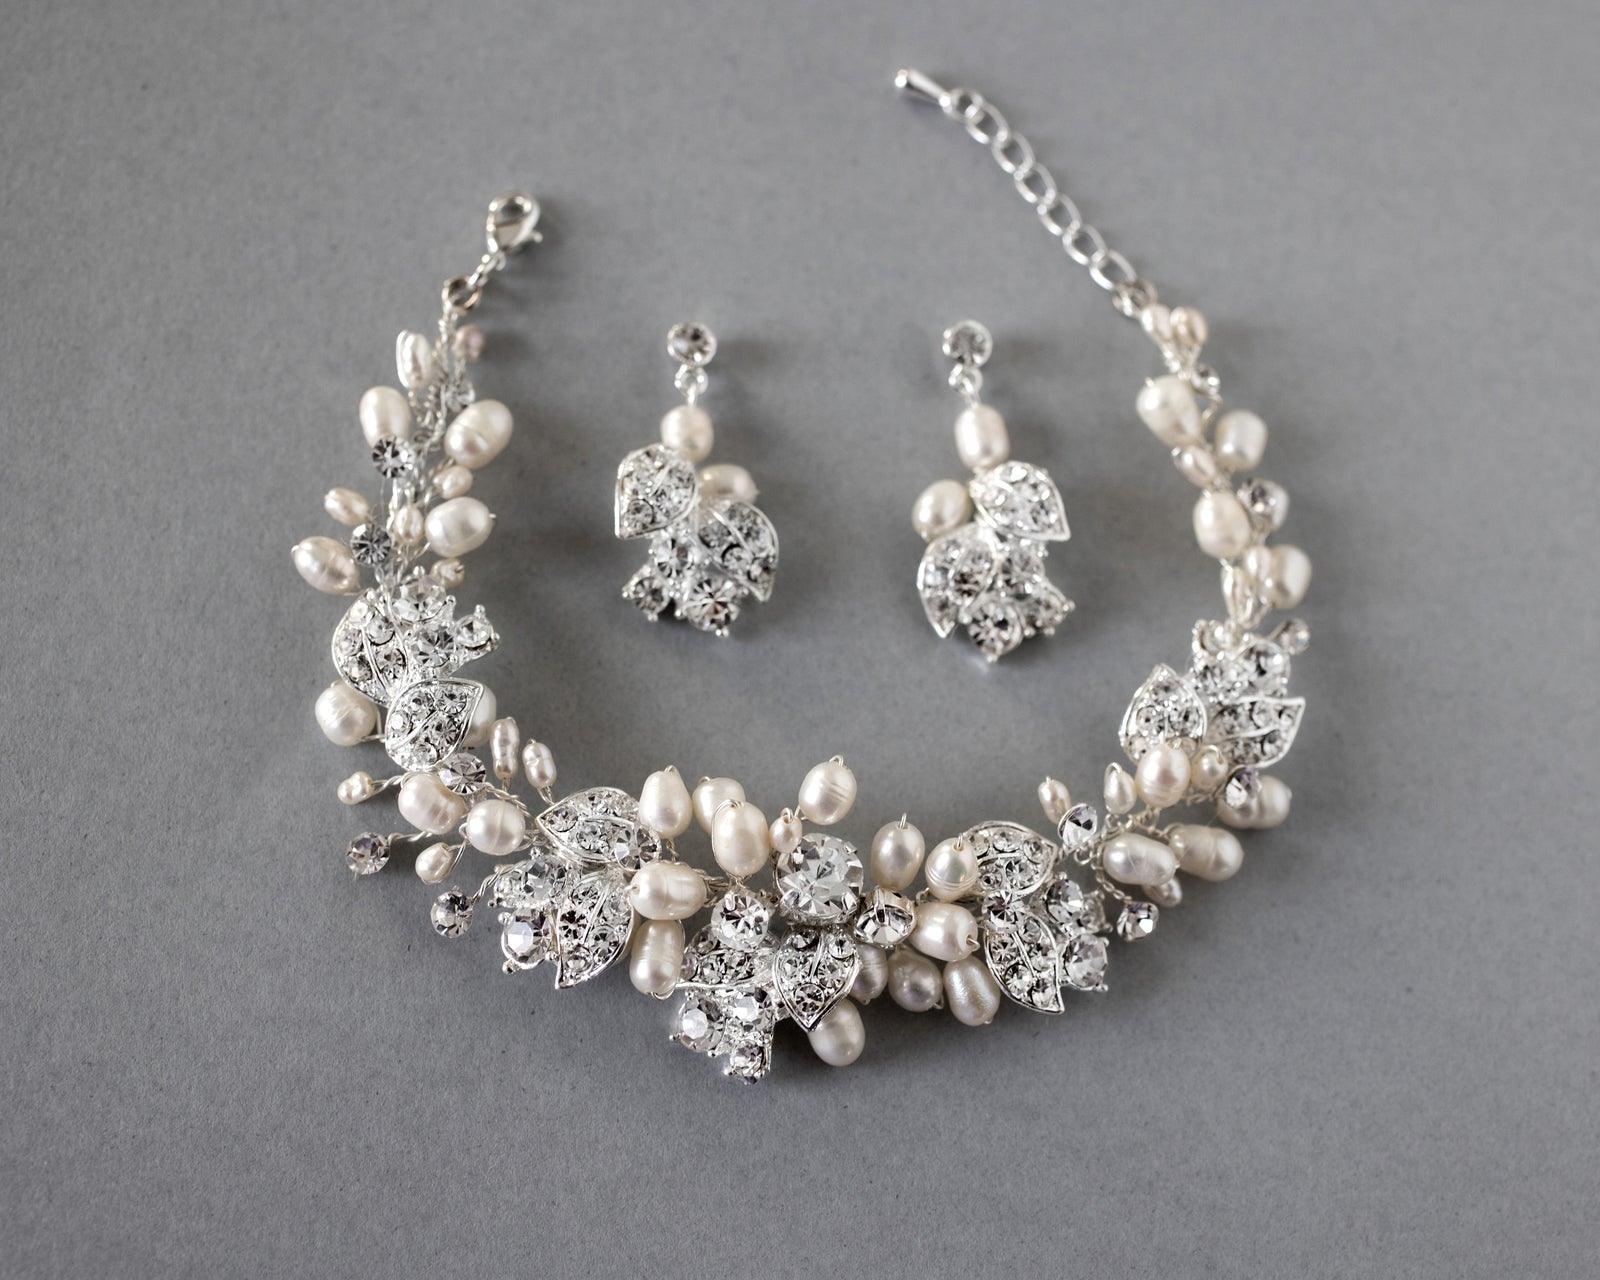 Freshwater Pearl and Crystal Bracelet and Earrings